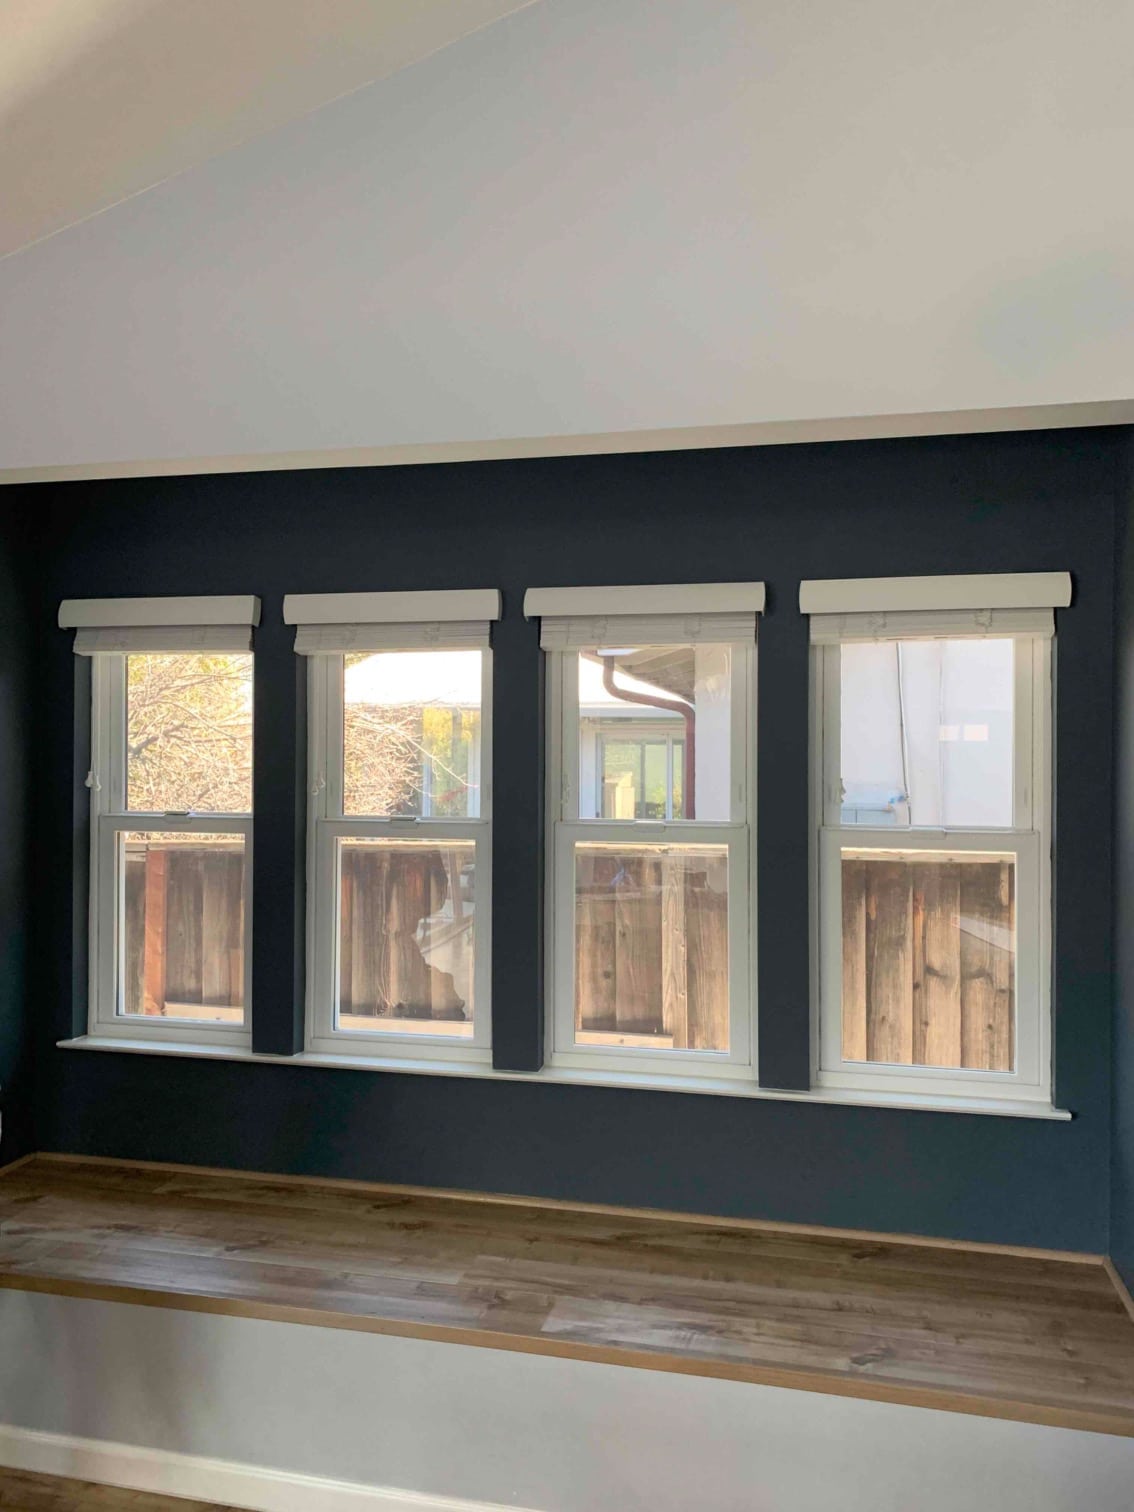 3M Night Vision Window Film for San Jose Homes, installed by ClimatePro